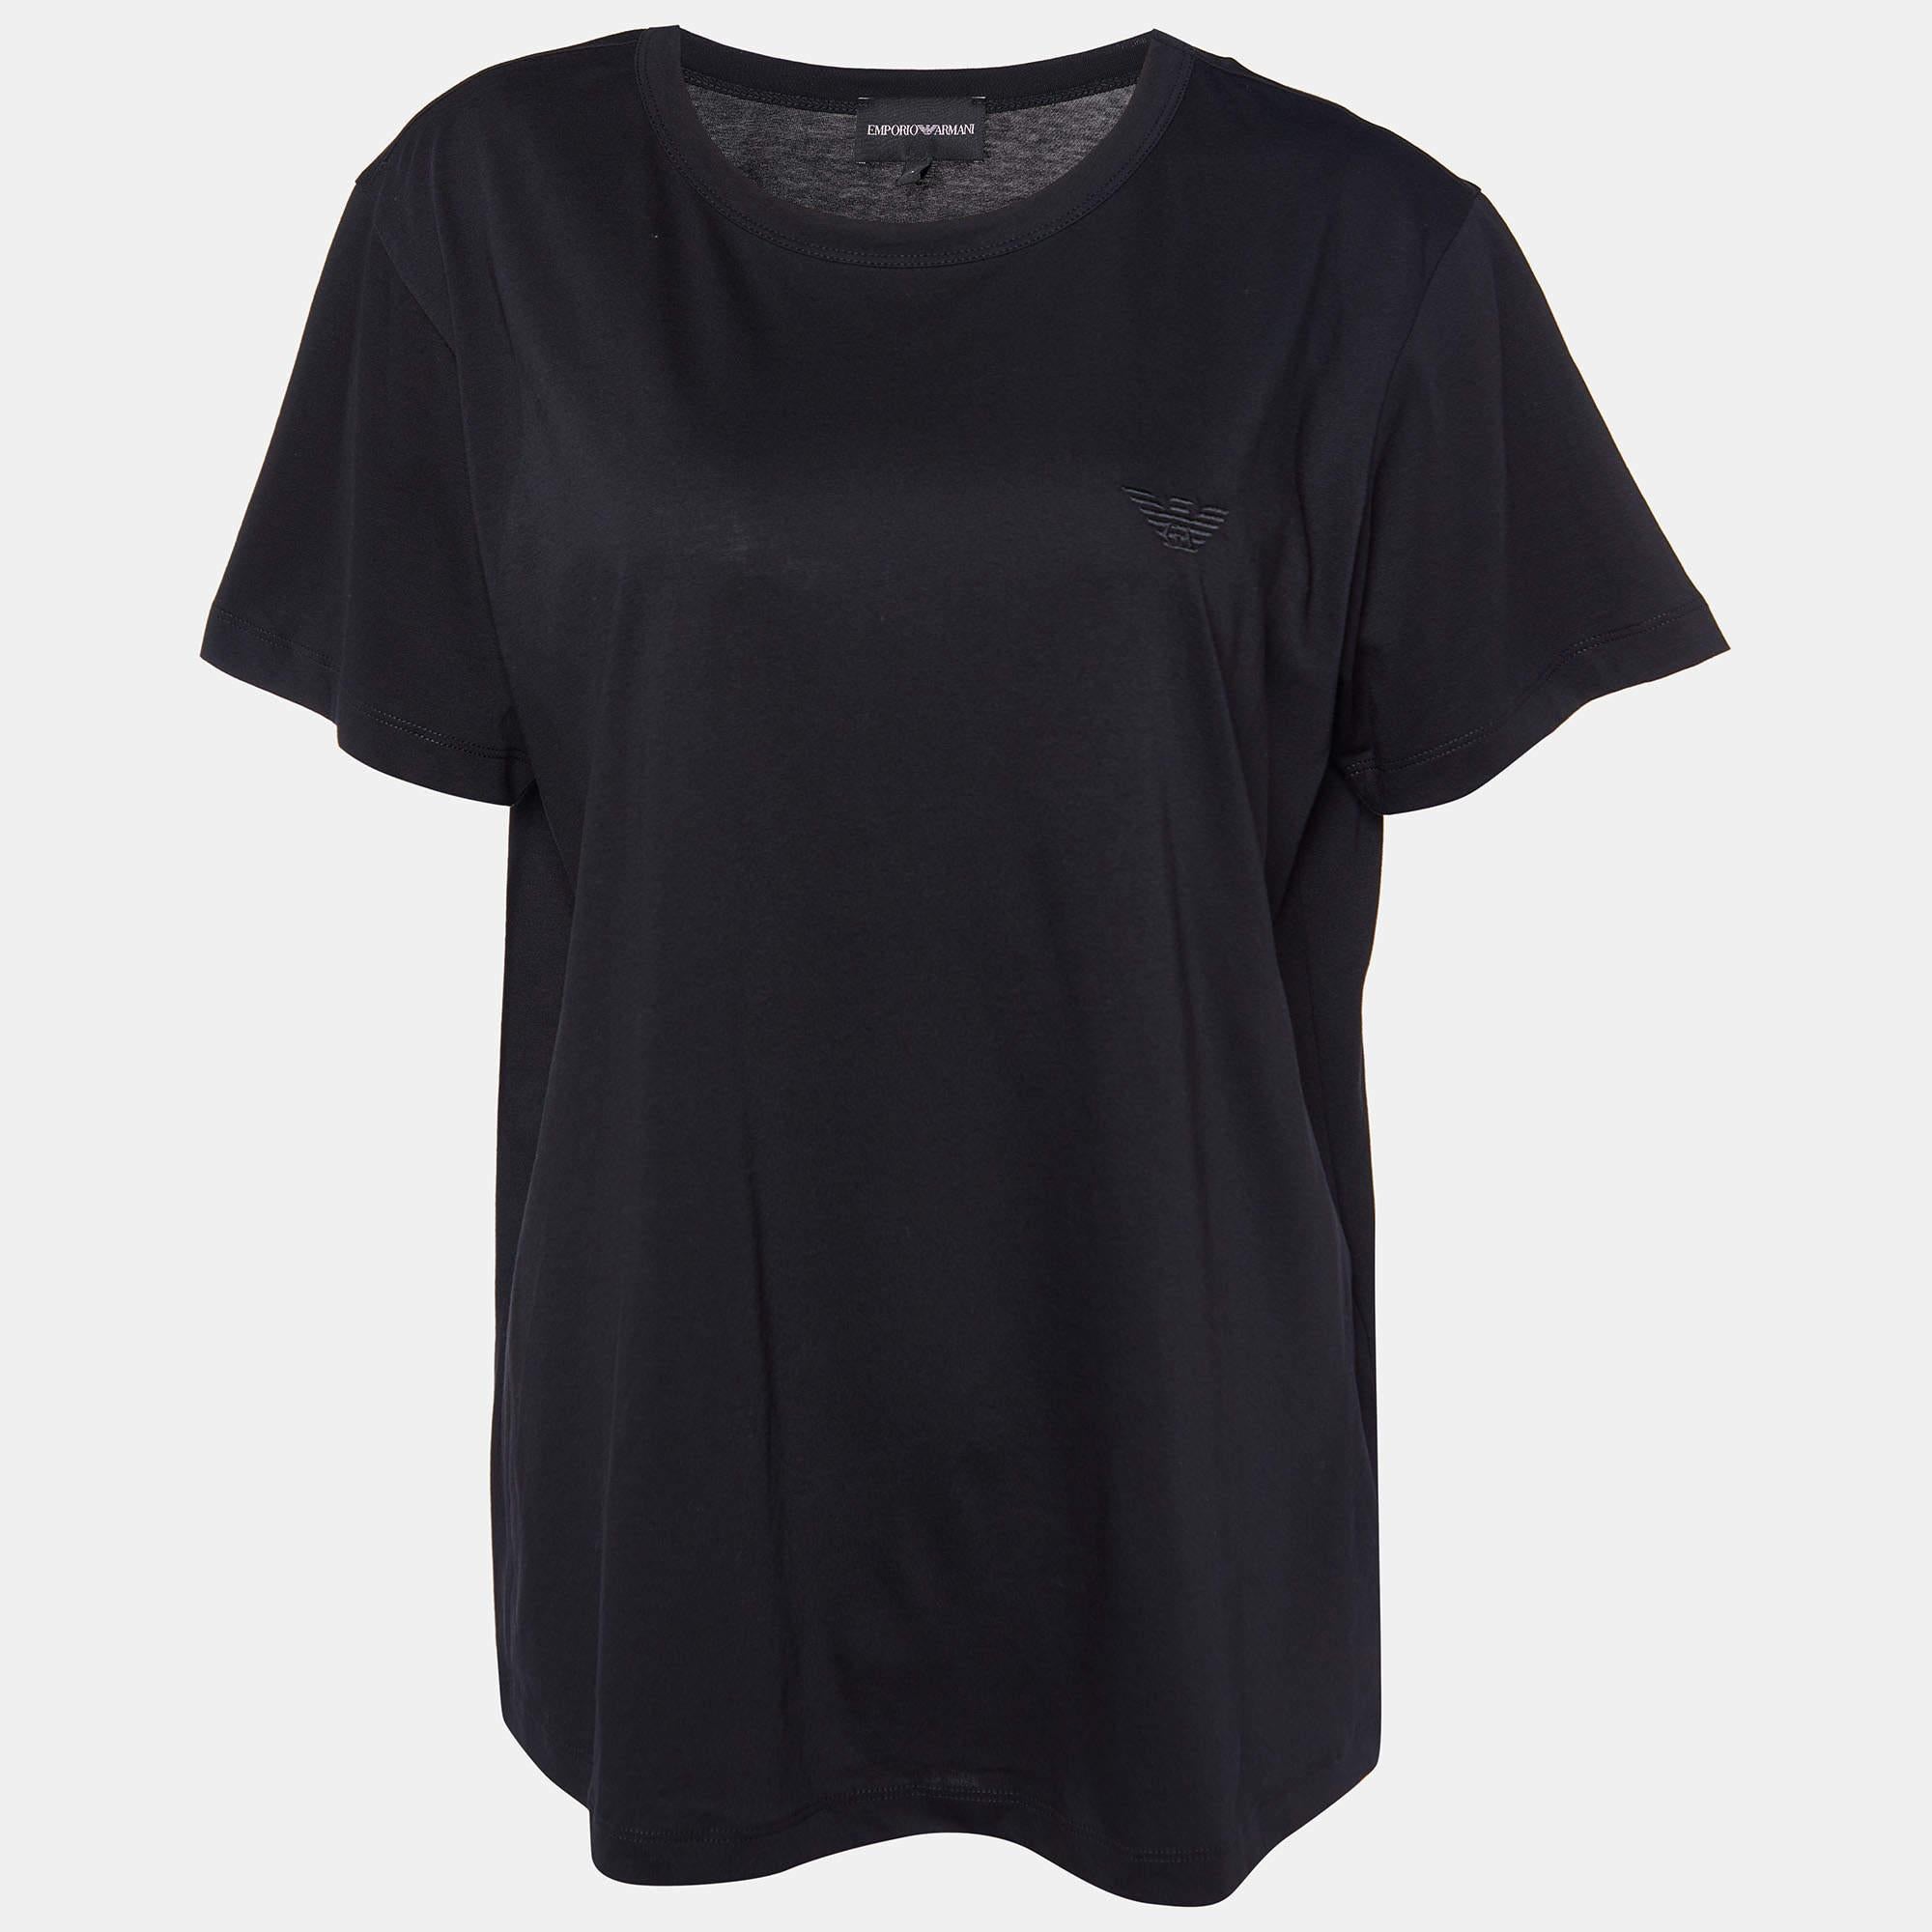 Elevate your everyday style with this meticulously crafted T-shirt by Emporio Armani. Impeccable tailoring ensures a perfect fit, while the breathable fabric offers unparalleled ease.

